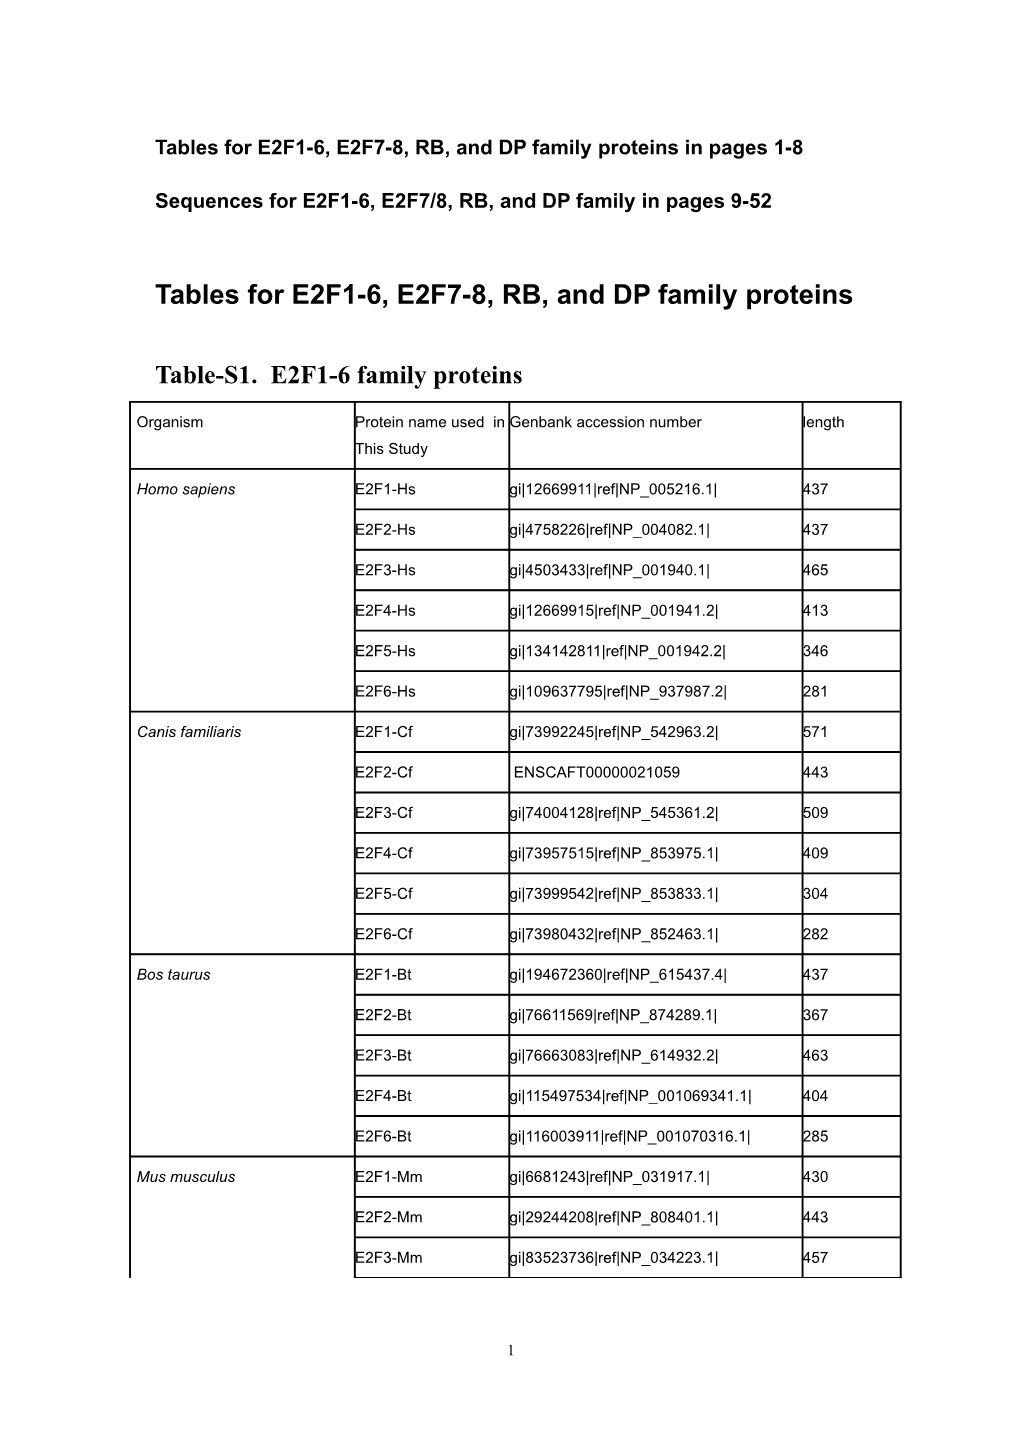 Tables for E2F1-6, E2F7-8, RB, and DP Family